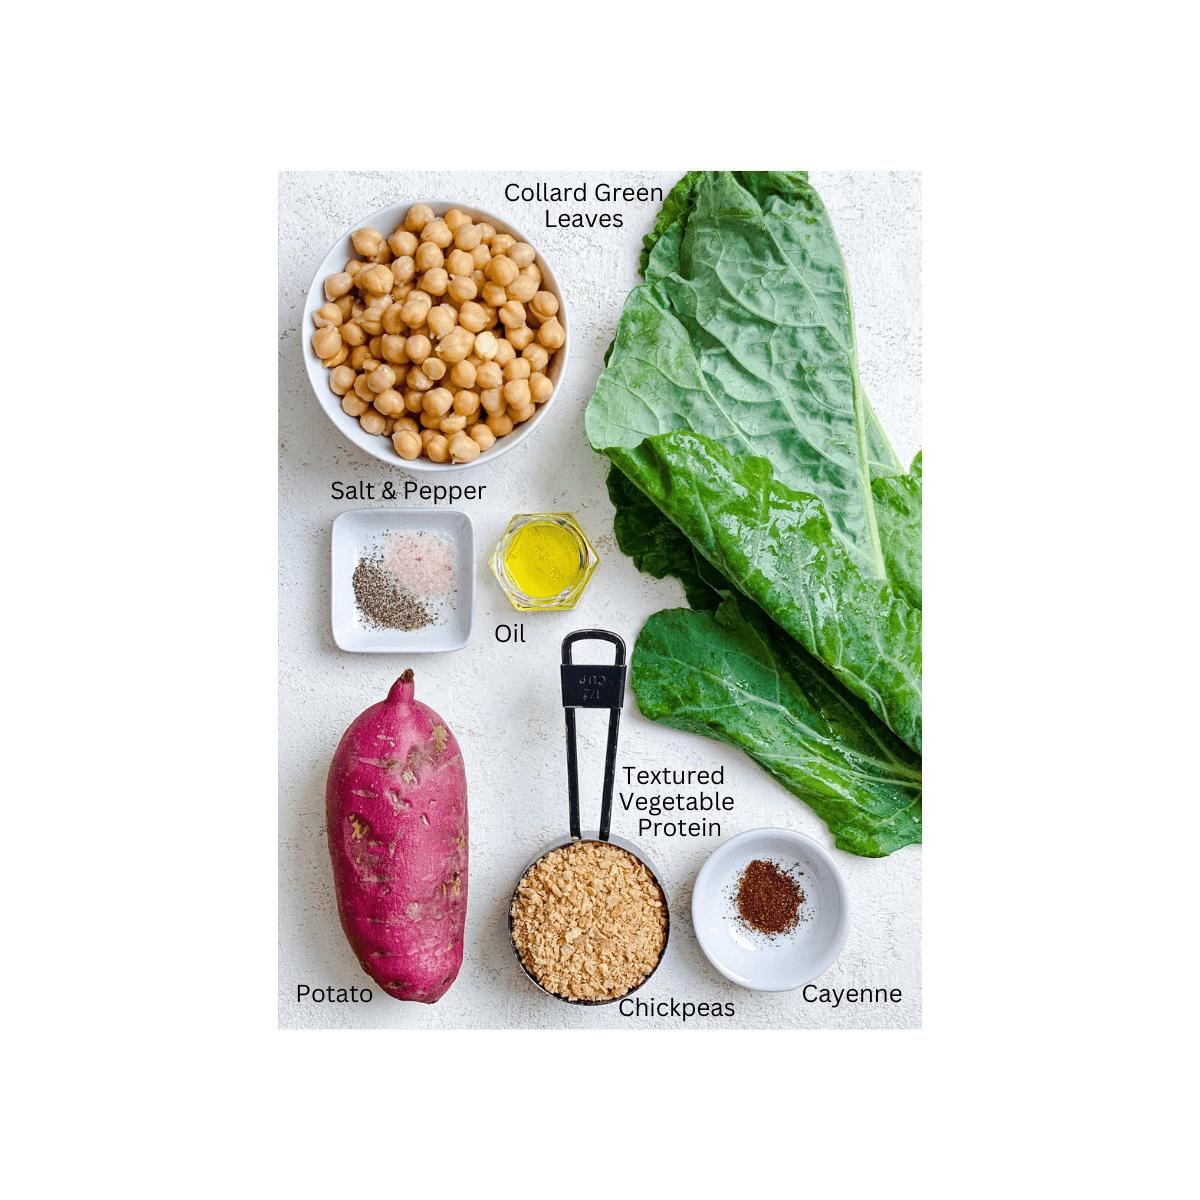 ingredients for Collard Green Lunch Wraps measured out against a white surface